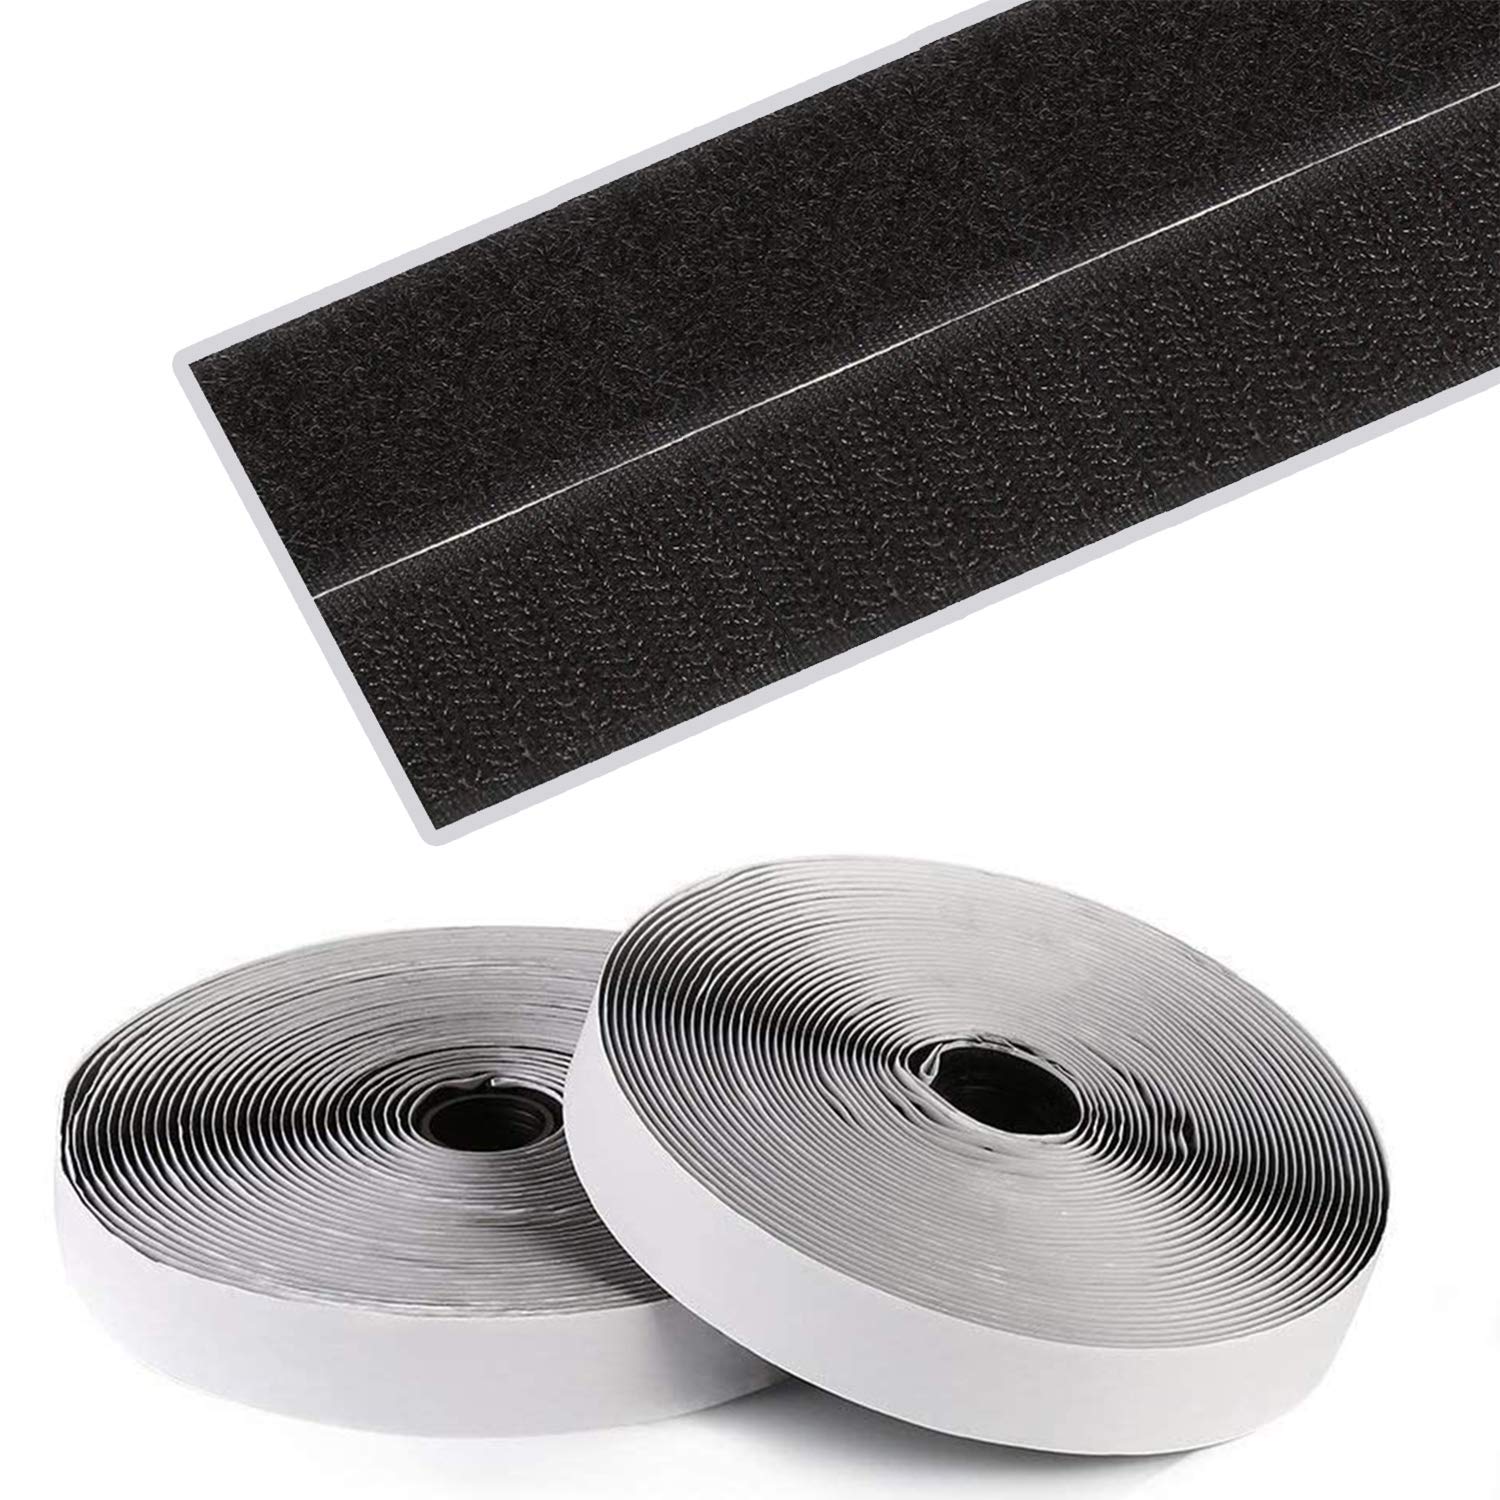 Self Adhesive Hook Tape and Loop Tape for Stationary, Pictures, etc..